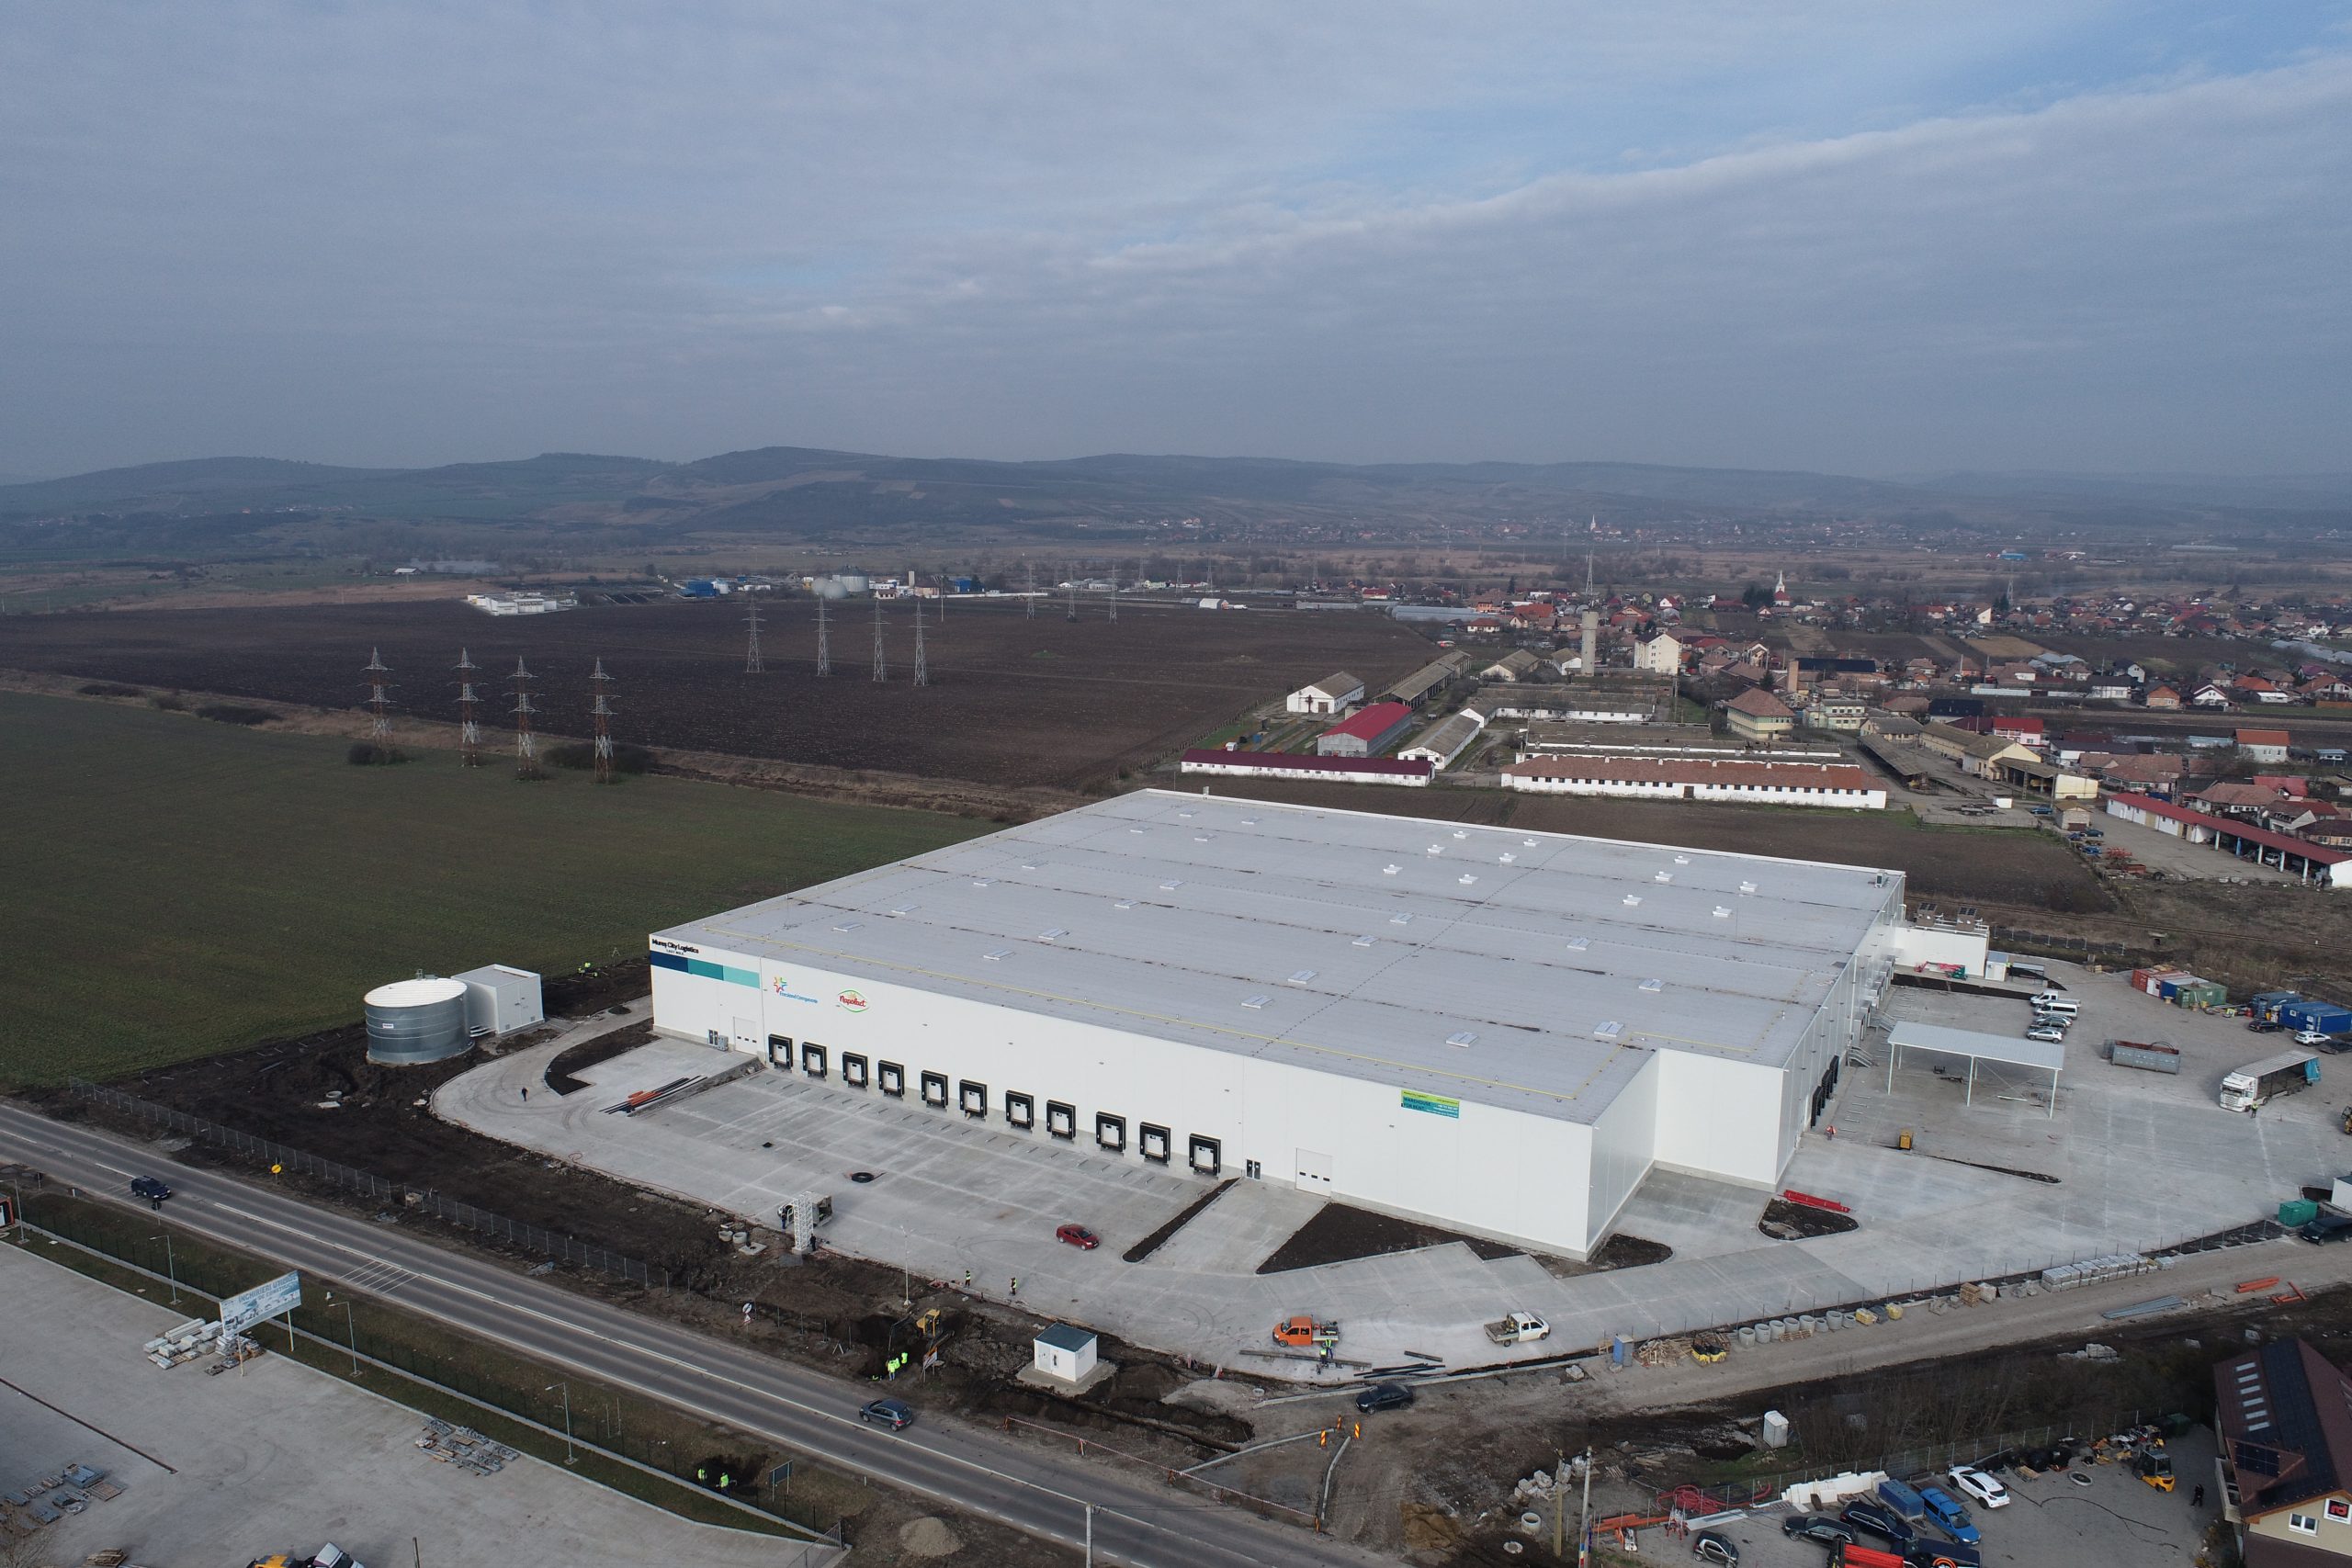 FrieslandCampina signs partnership with Global Vision and Globalworth for new logistics centre in Mureș